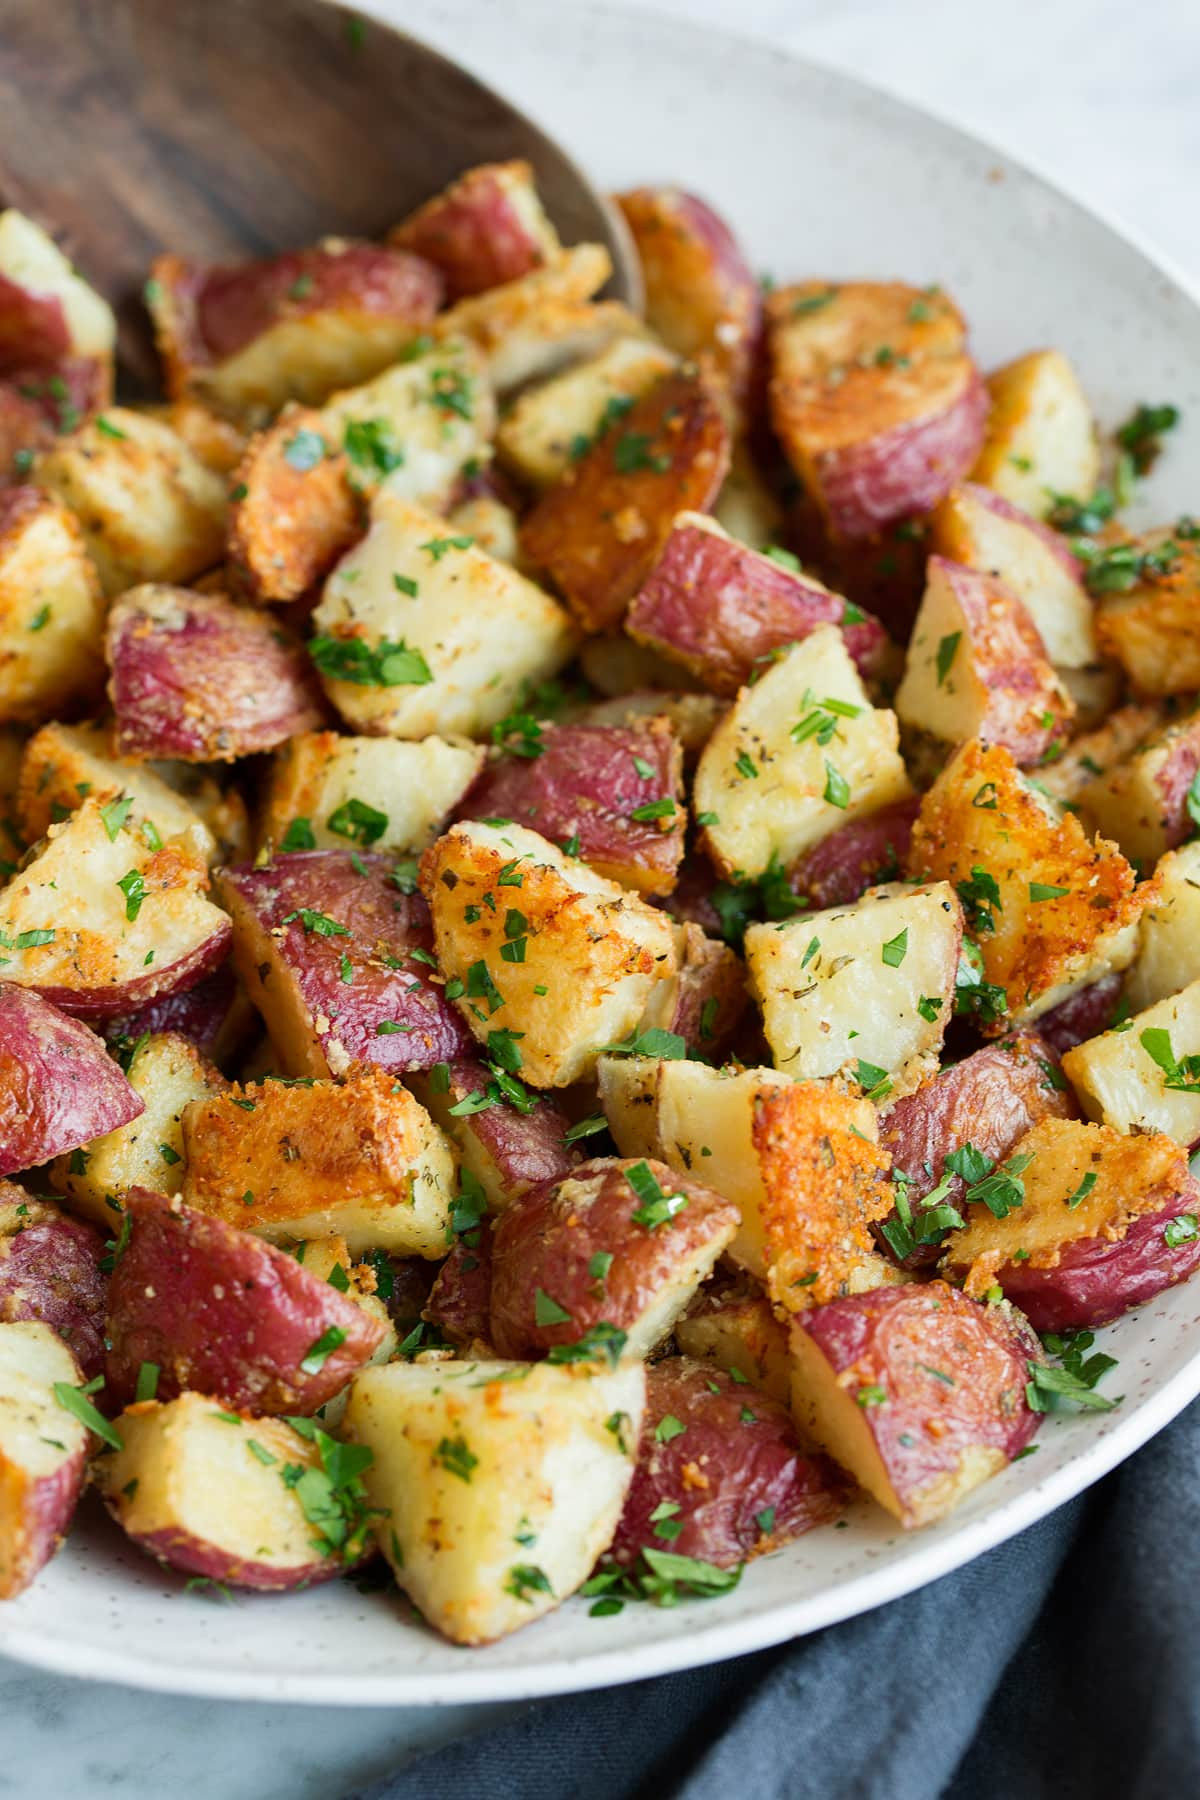 Roasted Baby Potatoes With Parmesan
 Oven Roasted Potatoes with Parmesan Garlic & Herbs